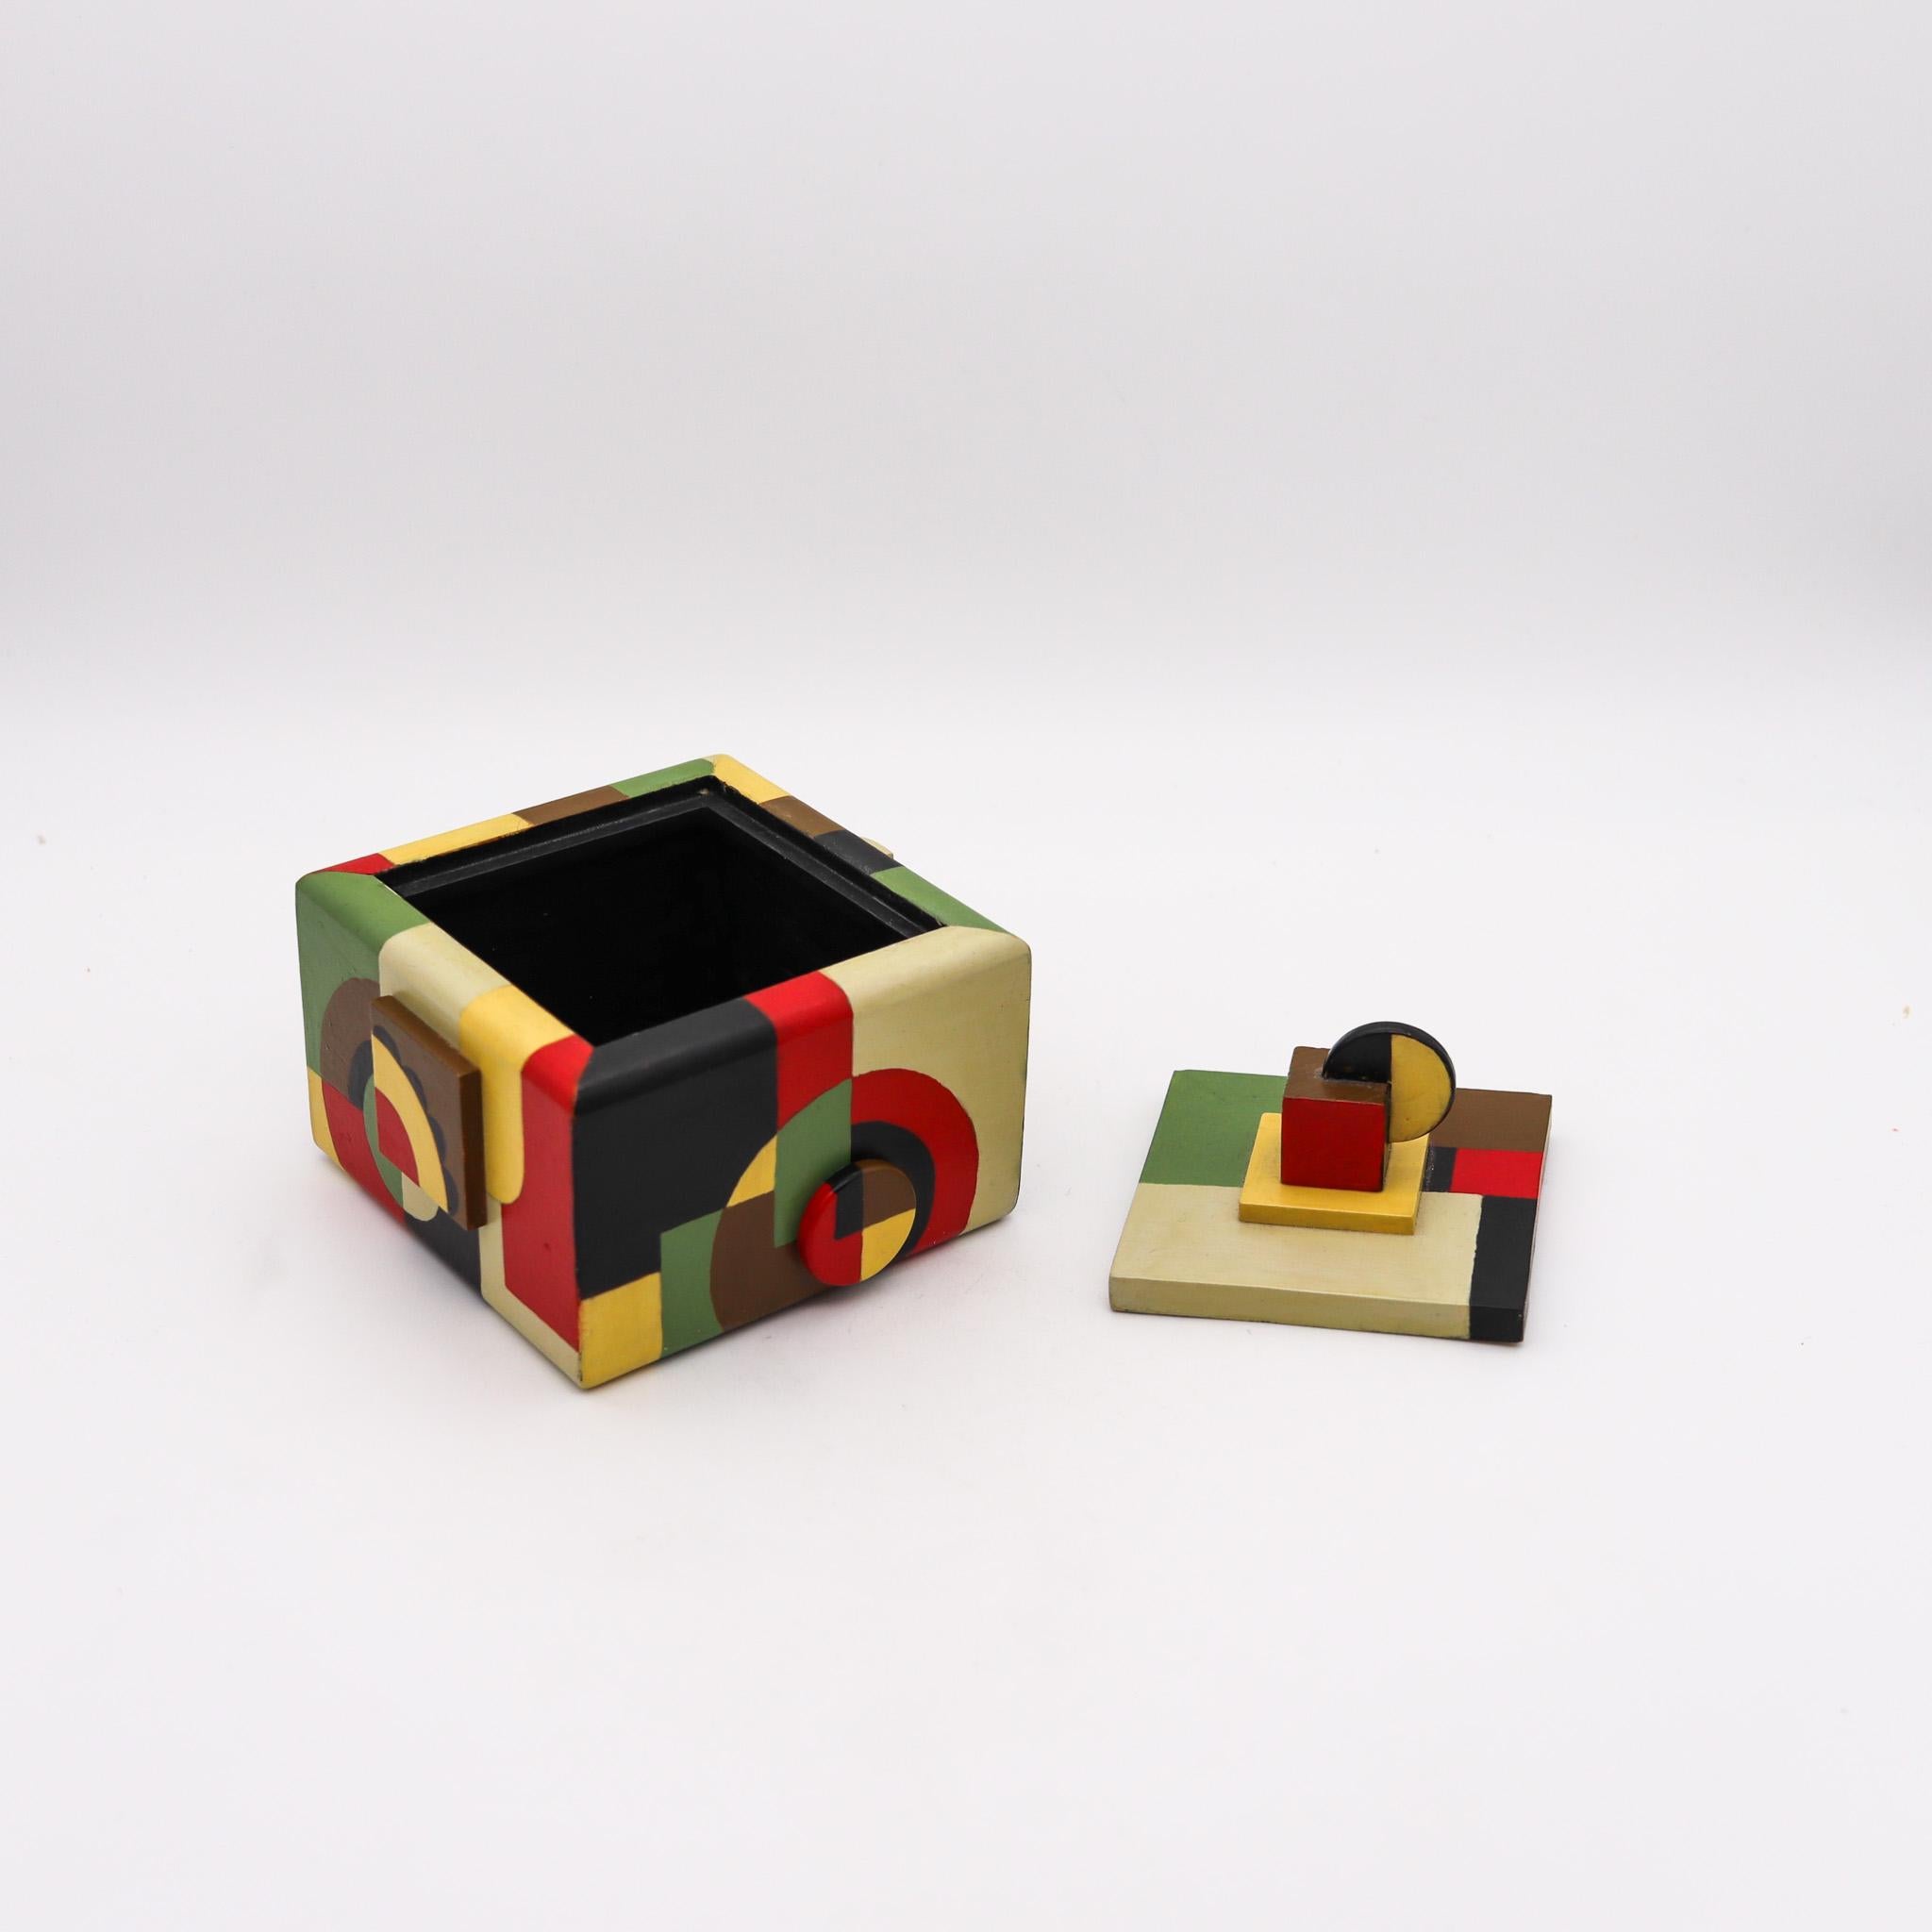 Hand-Carved Dutch 1930 De Stijl Art Deco Trinket Box in Wood with Polychromate Paint